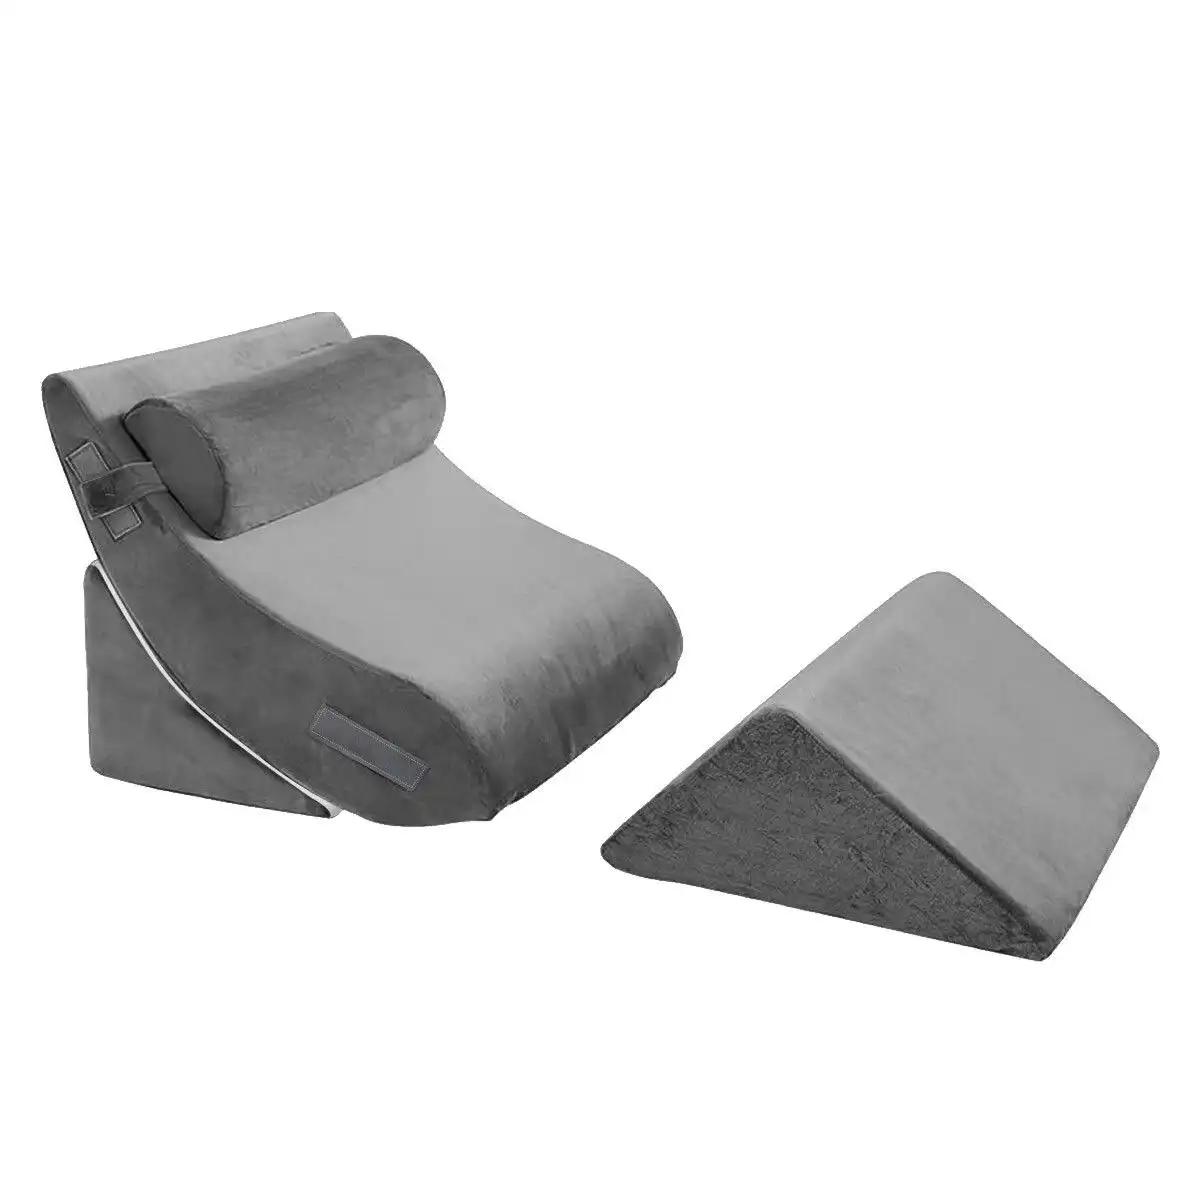 Ausway 4 Pcs Wedge Pillow Set Memory Foam Bed Cushion Back and Head Support Adjustable Gray